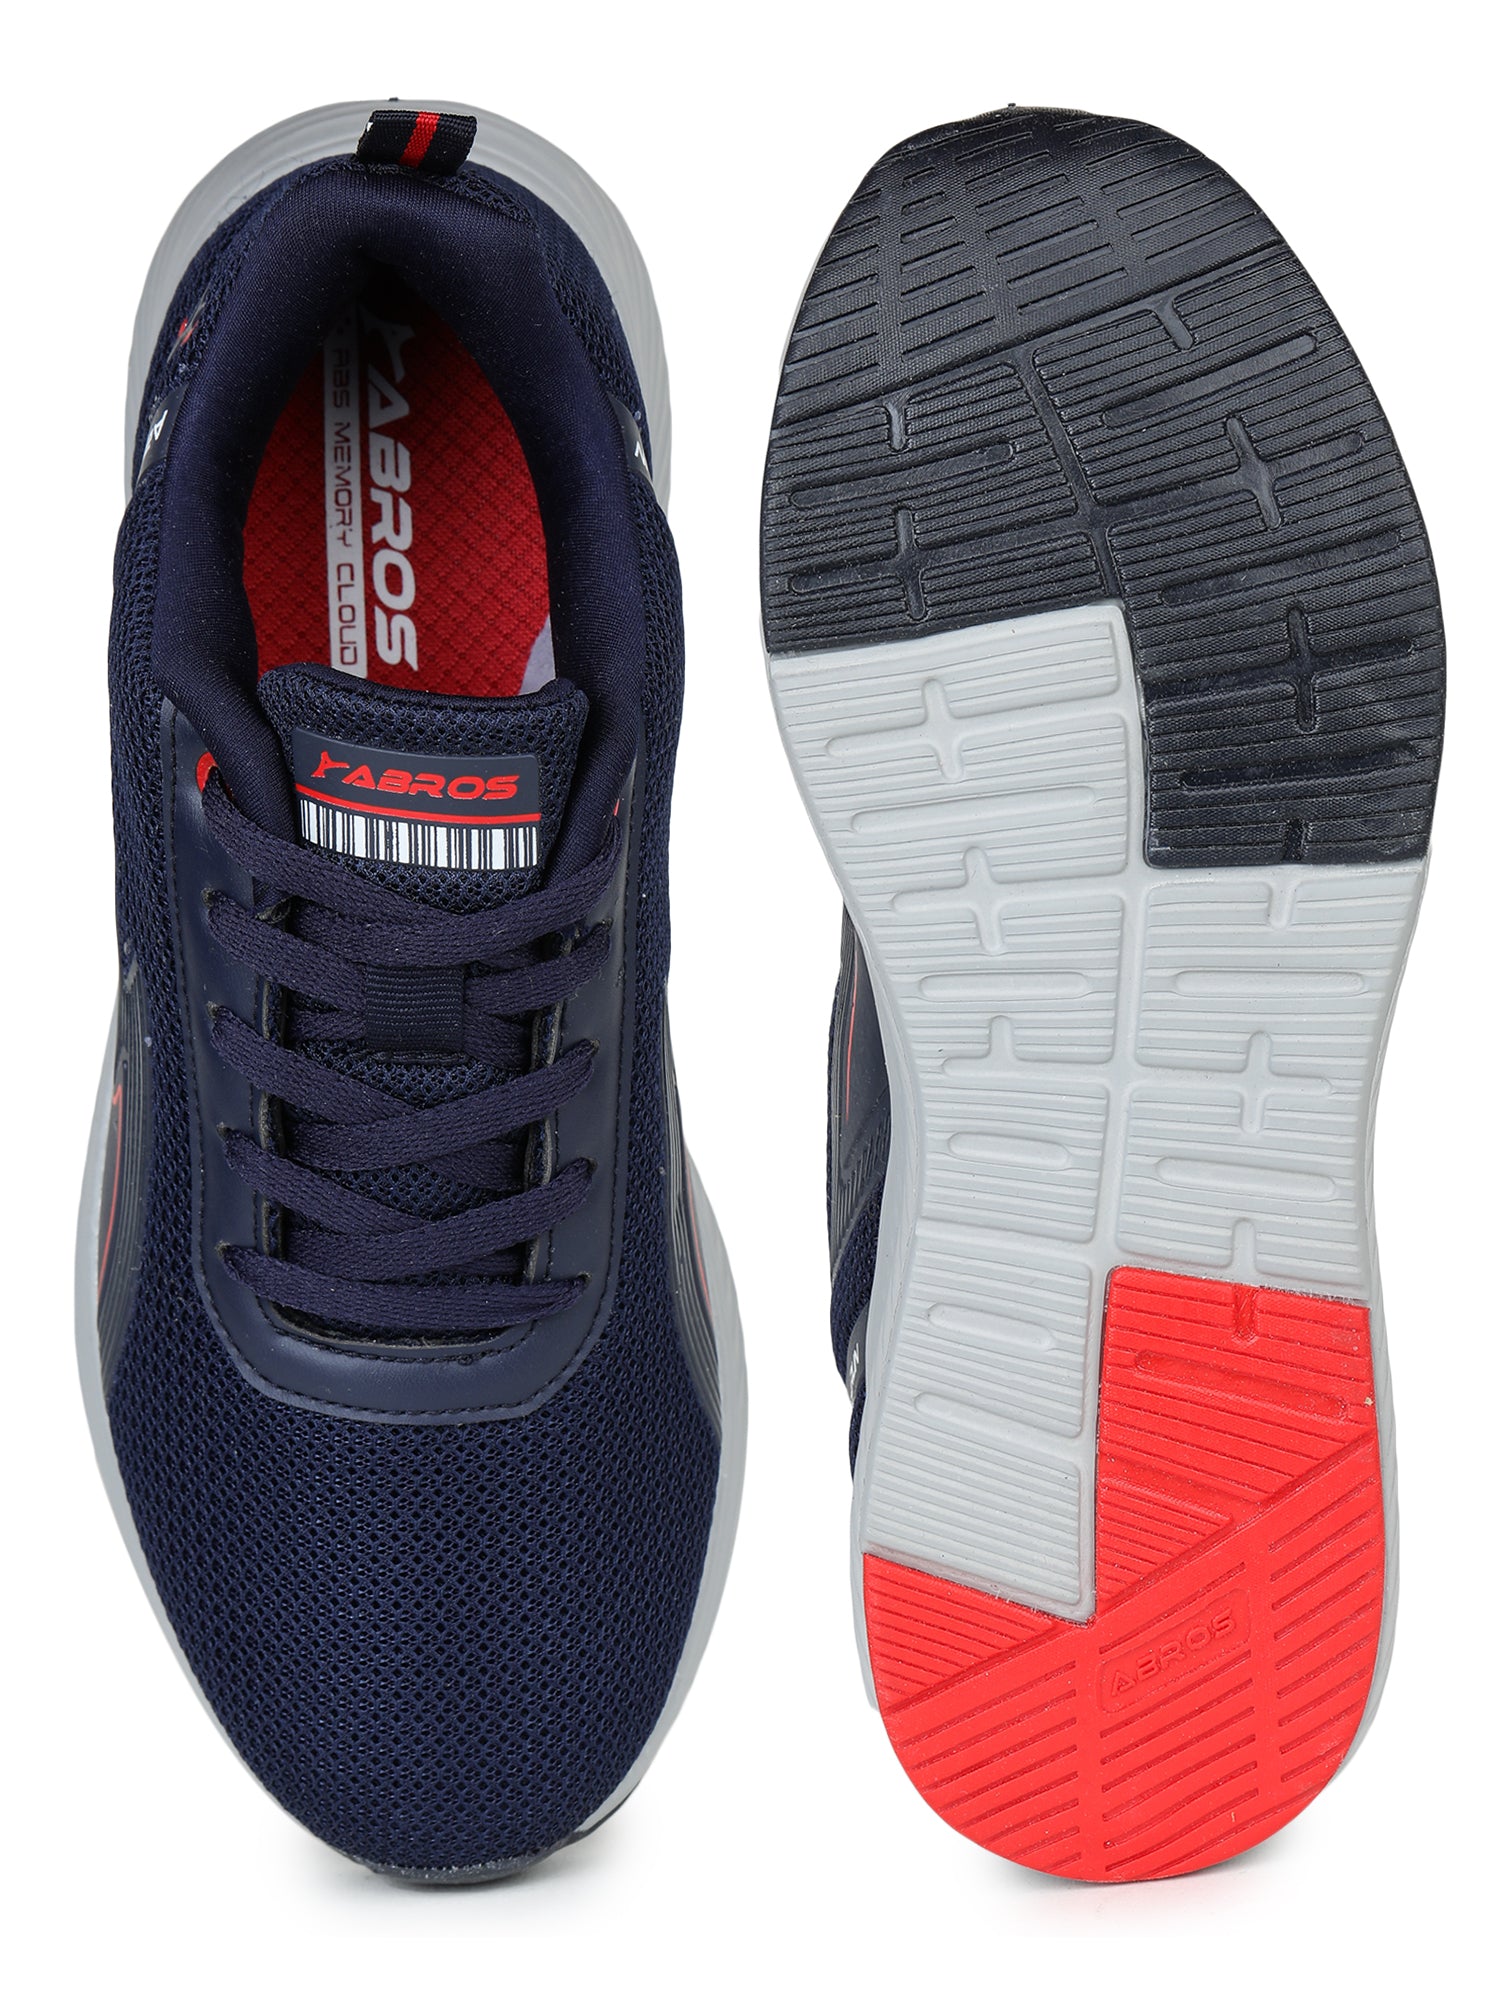 SAIL-M RUNNING SPORTS SHOES FOR MEN